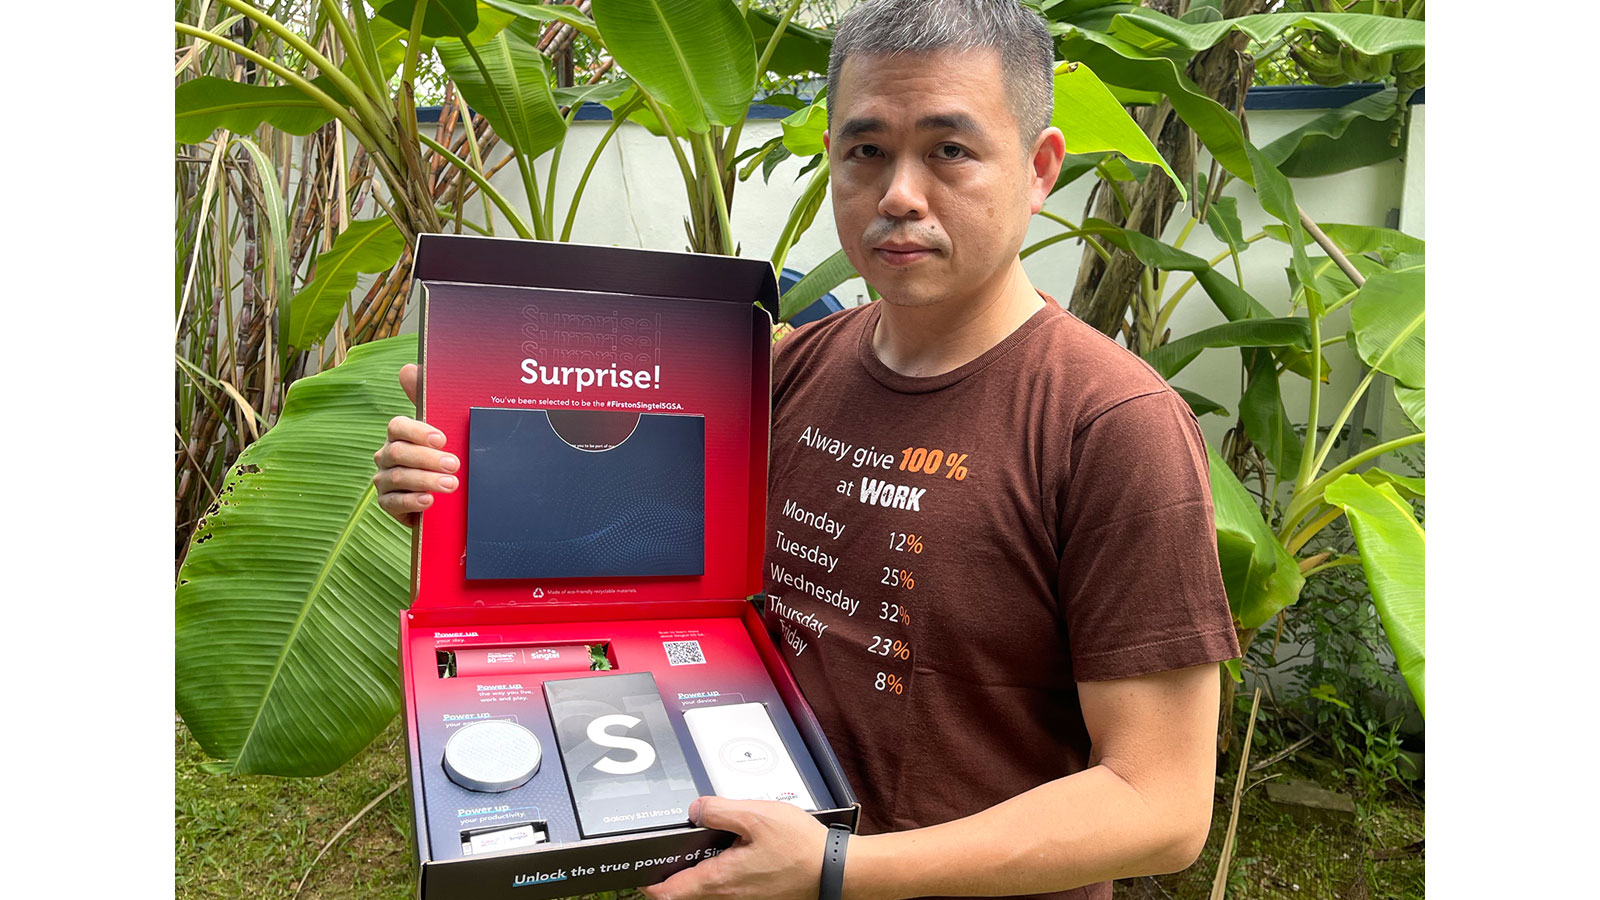 Mr Sherwin Teo unboxing the Singtel PowerUp 5G Kit that comprises a Samsung S21 Ultra 5G handset, a power bank, a thumb drive, a portable speaker and an energy bar.